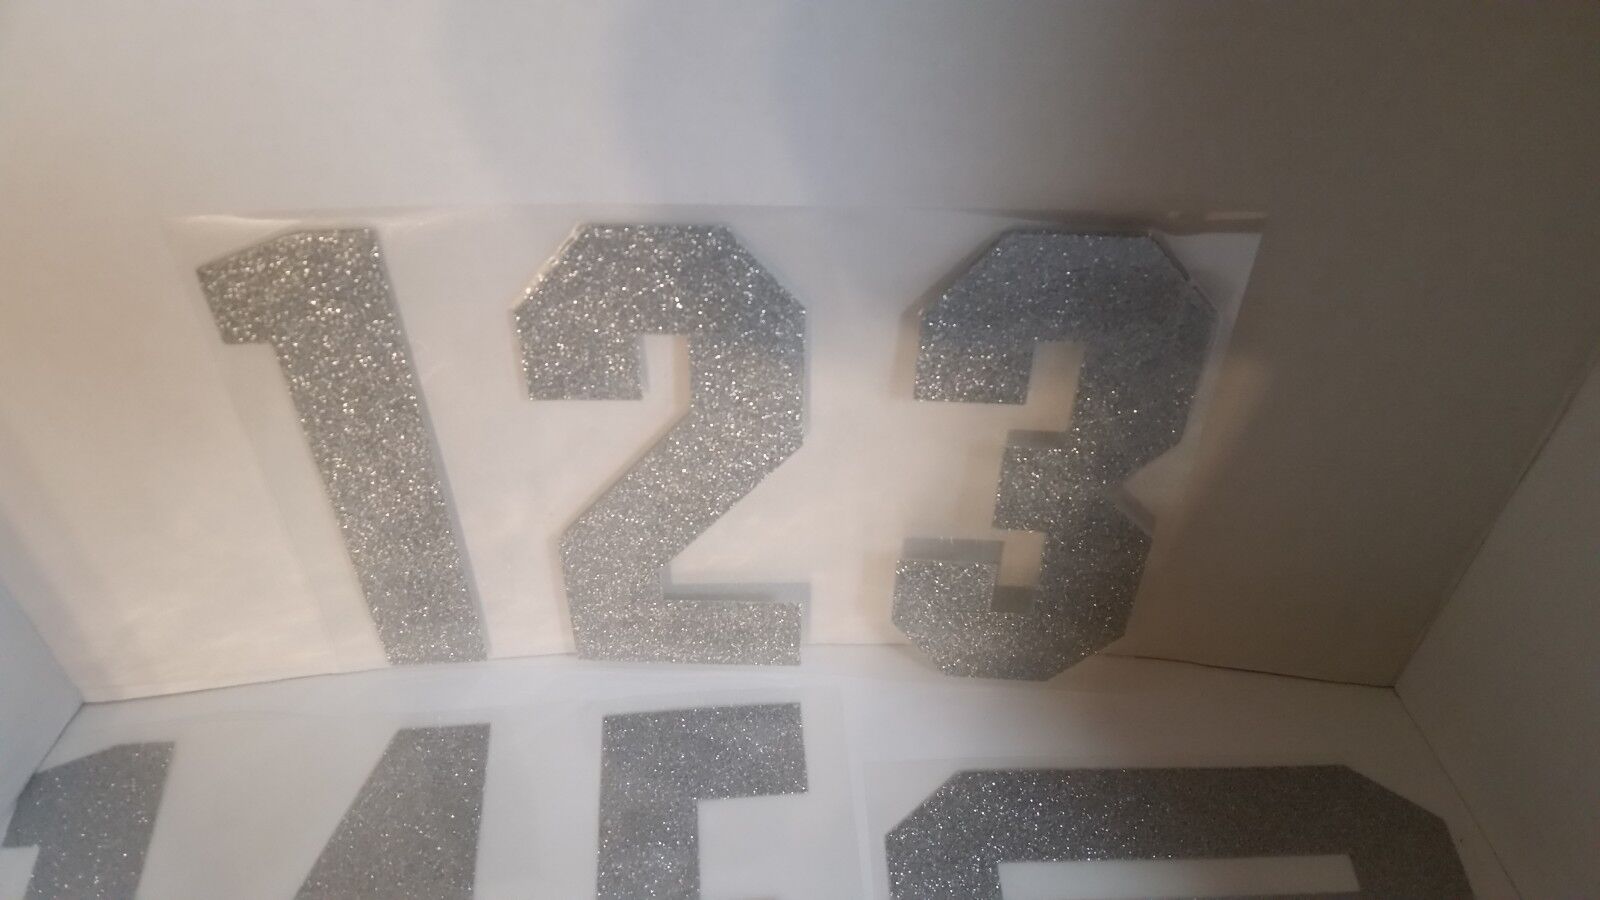 12 Packs: 12 ct. (144 total) 8 Iron-On Silver Glitter Numbers by Make  Market®